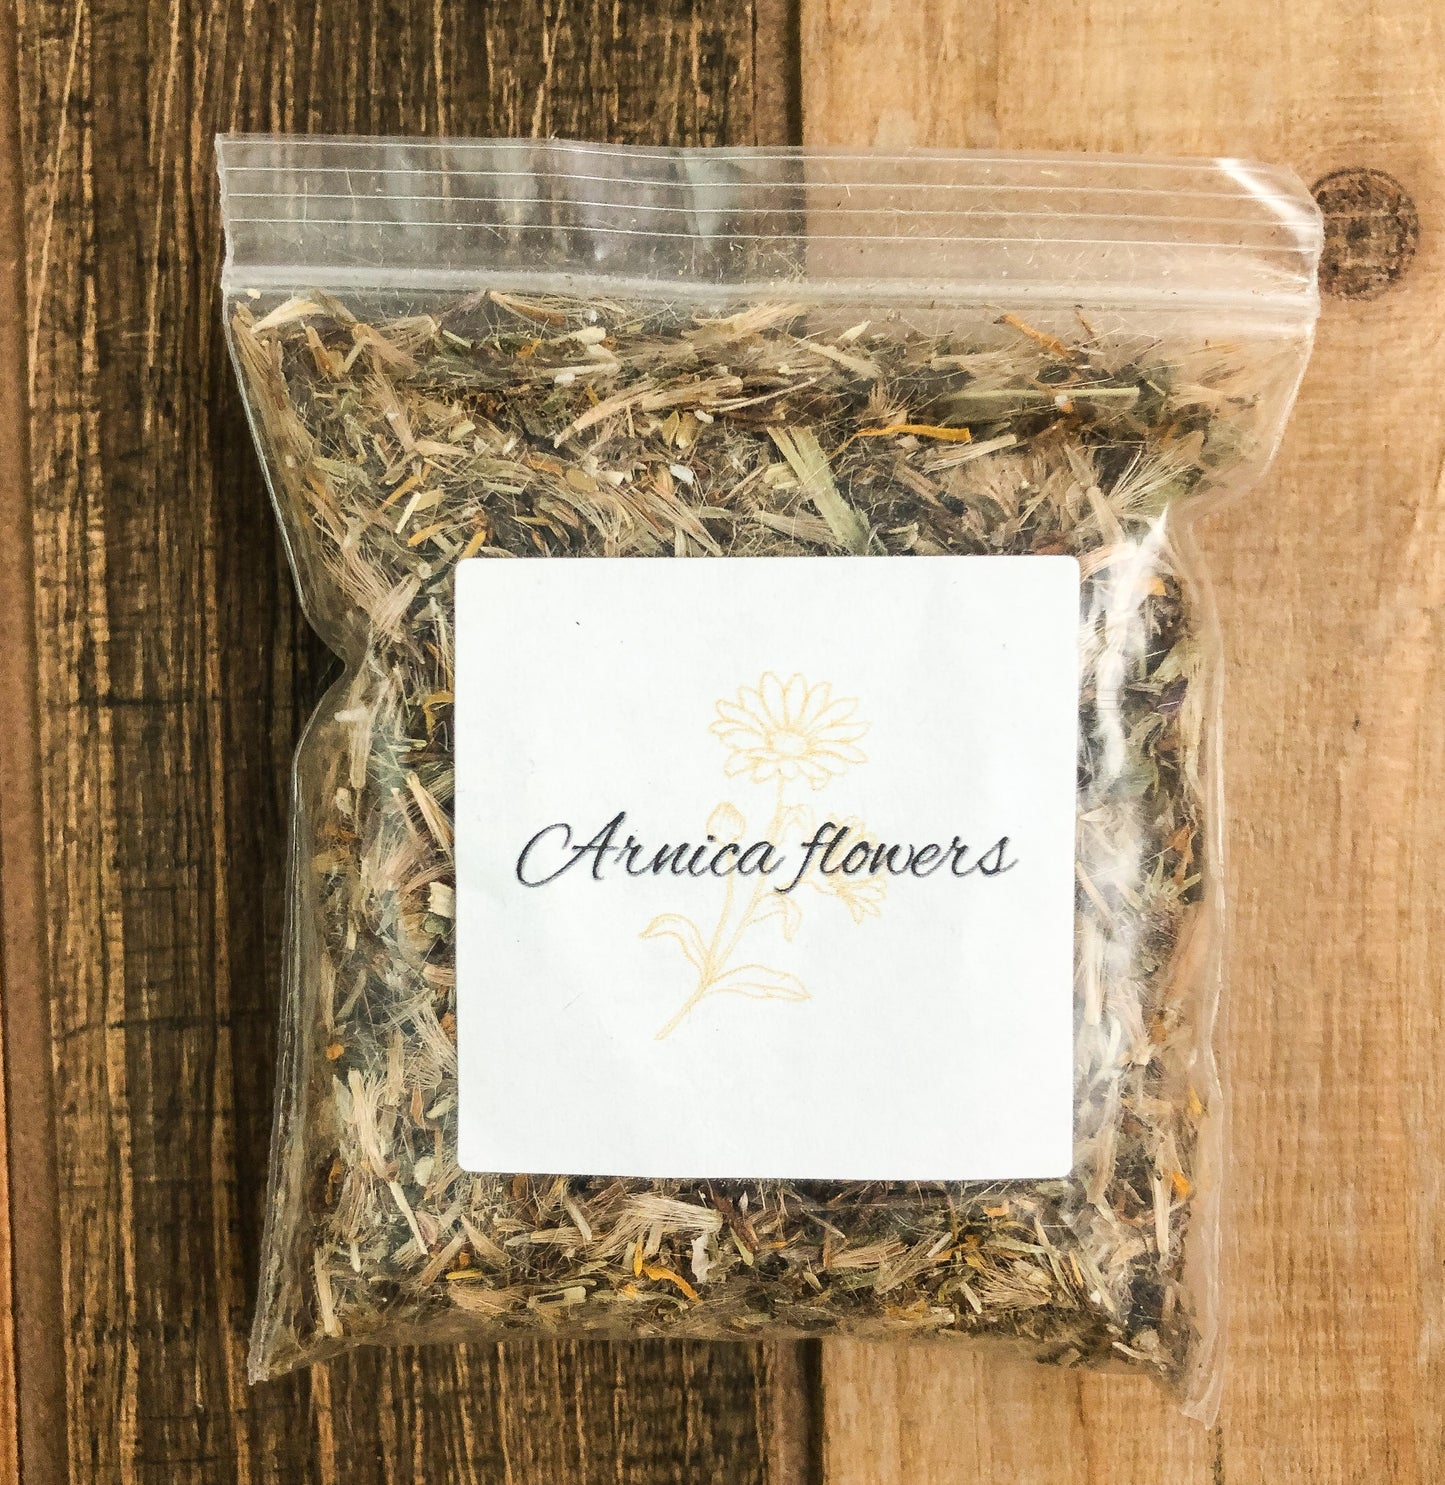 dried arnica flowers in a small clear plastic bag with a white label on front and wooden background